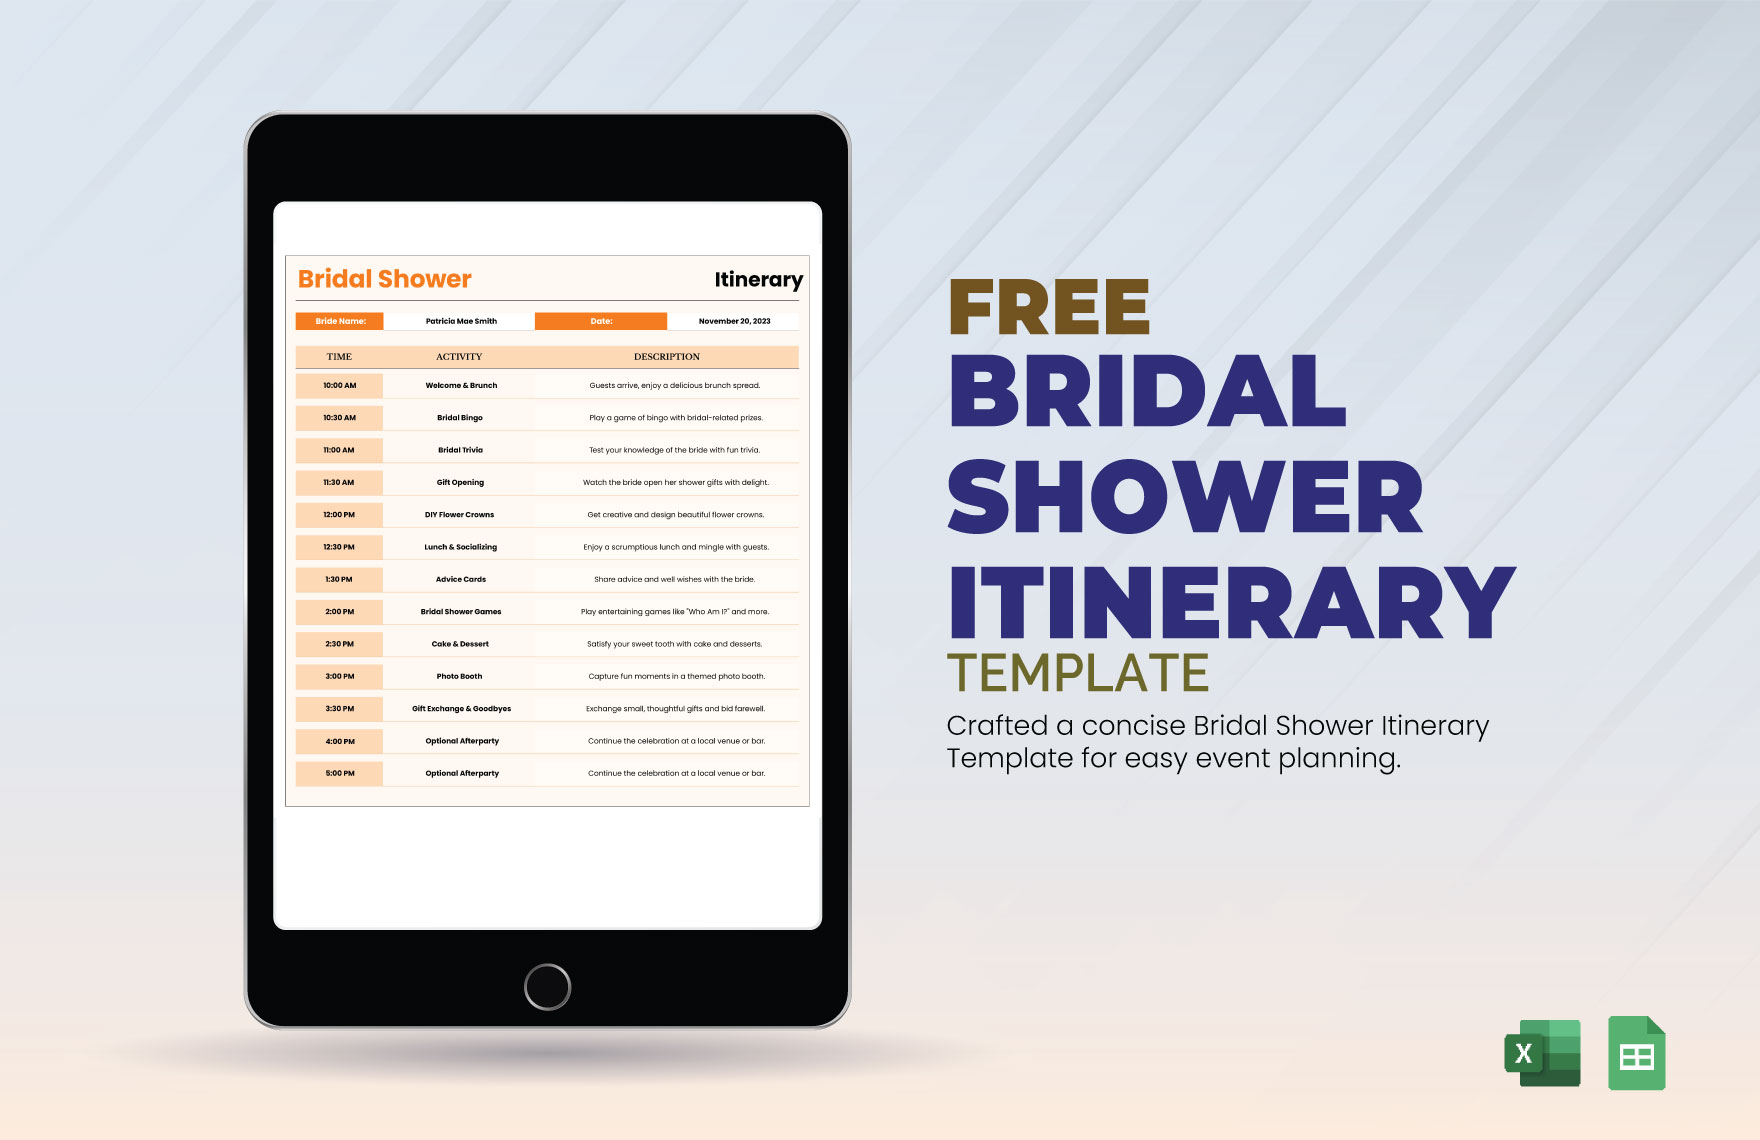 Free Bridal Shower Itinerary Template